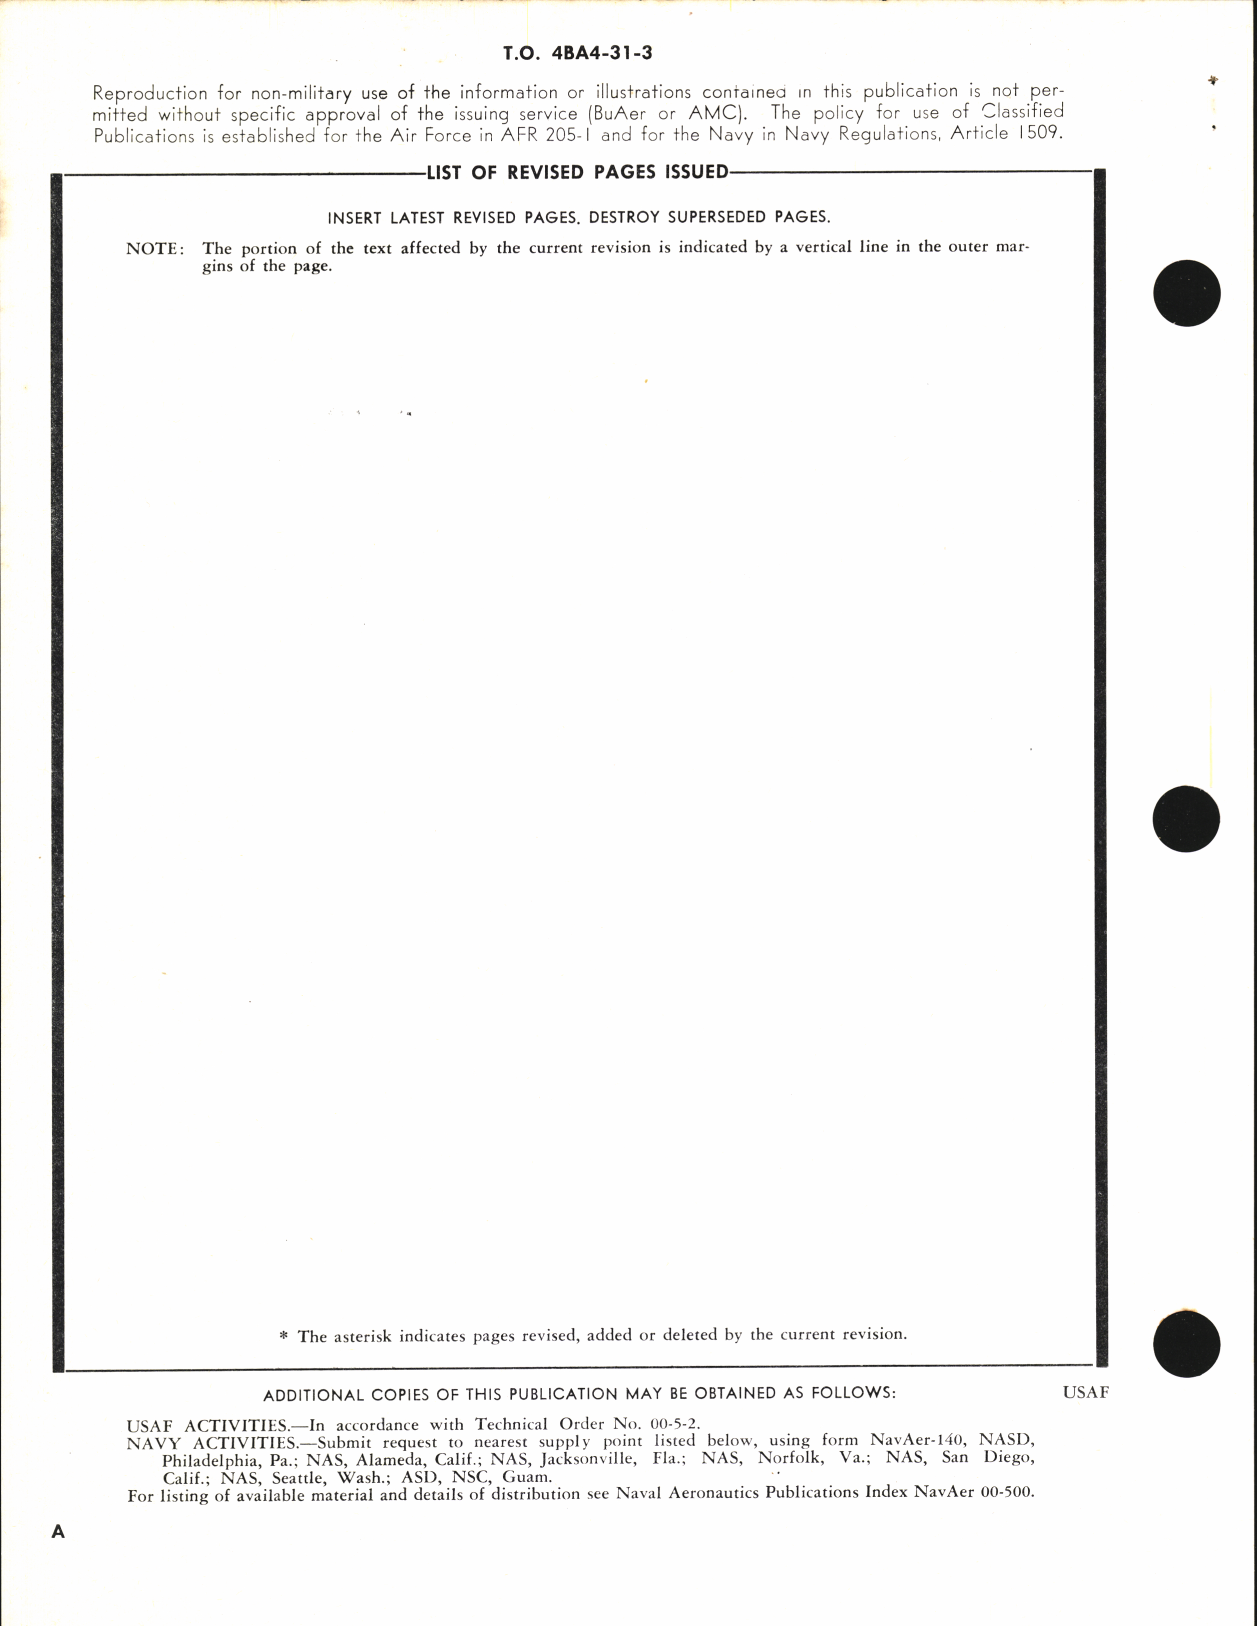 Sample page 2 from AirCorps Library document: Overhaul Instructions for Manually Operated Power Brake Valve